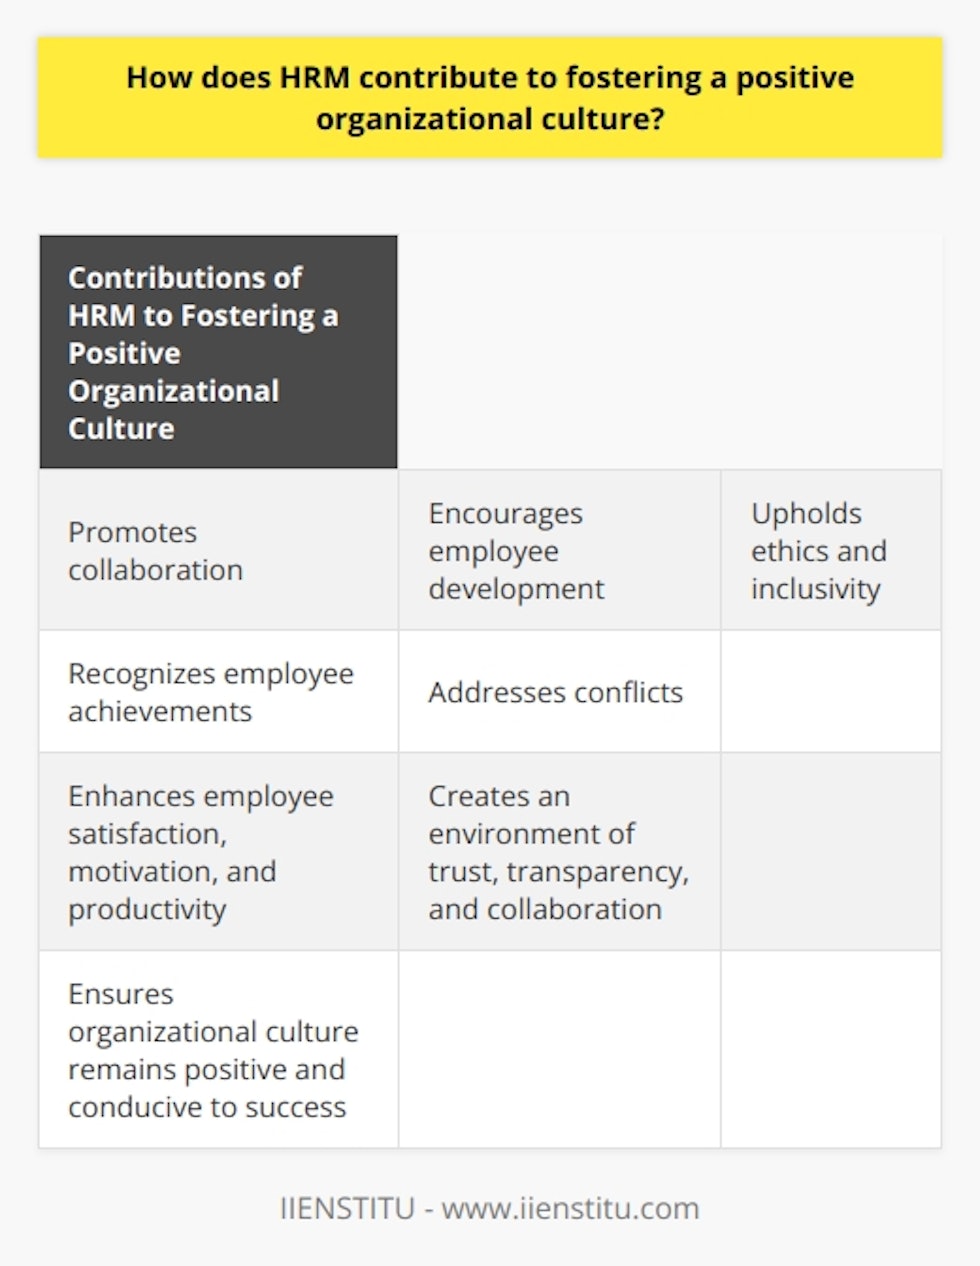 Overall, HRM plays a crucial role in fostering a positive organizational culture by promoting collaboration, encouraging employee development, upholding ethics and inclusivity, recognizing employee achievements, and addressing conflicts. These key contributions not only enhance employee satisfaction, motivation, and productivity but also create an environment of trust, transparency, and collaboration within the organization. By prioritizing these aspects, HRM ensures that the organizational culture remains positive and conducive to the success of both employees and the organization as a whole.